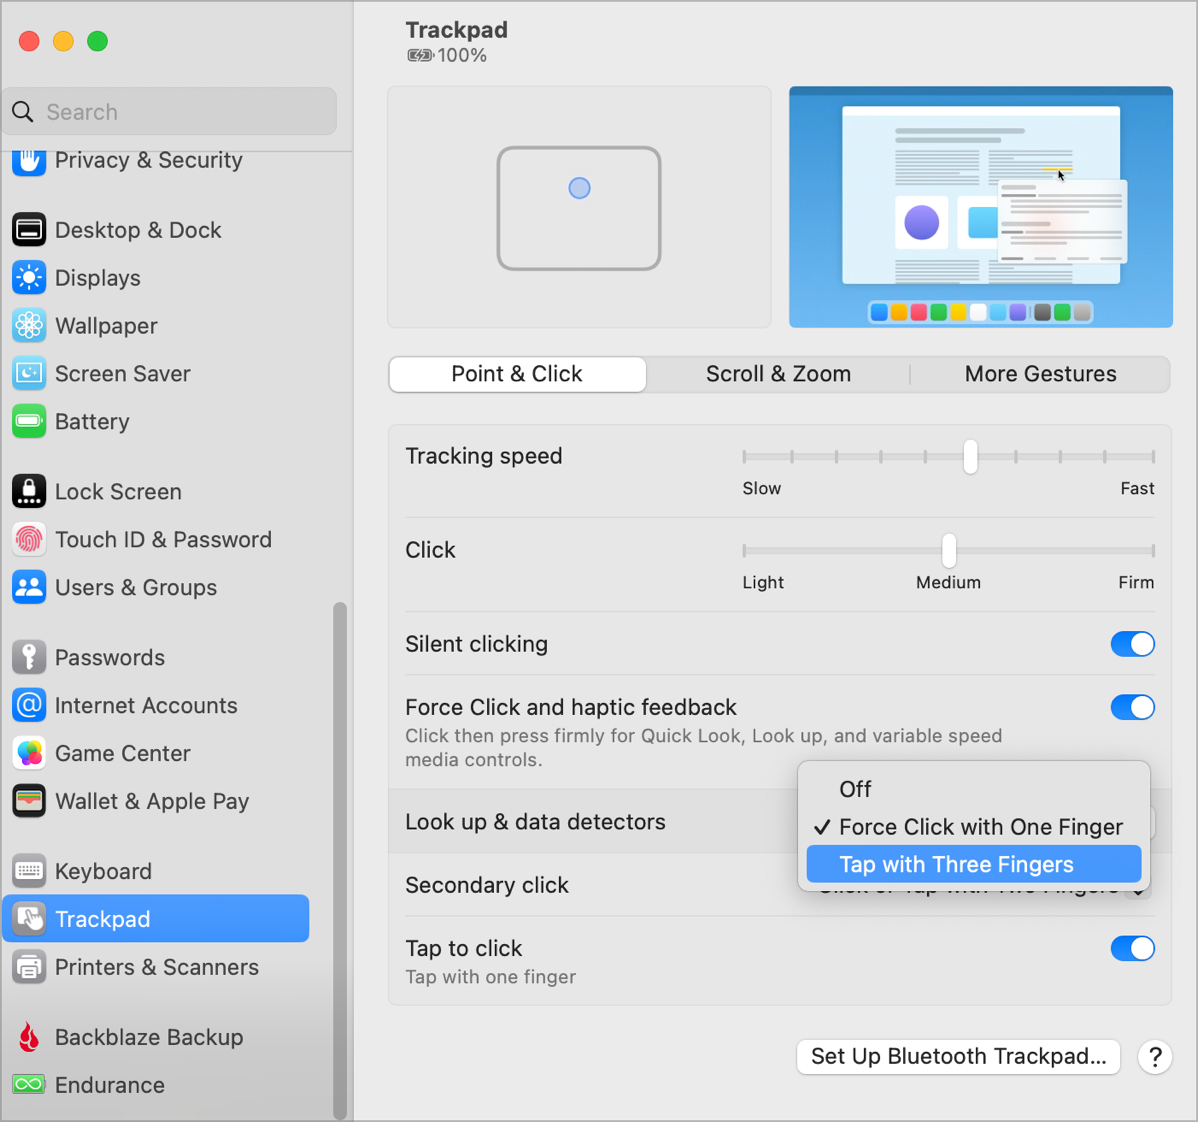 Trackpad Settings to change Look up and data detectors triggers